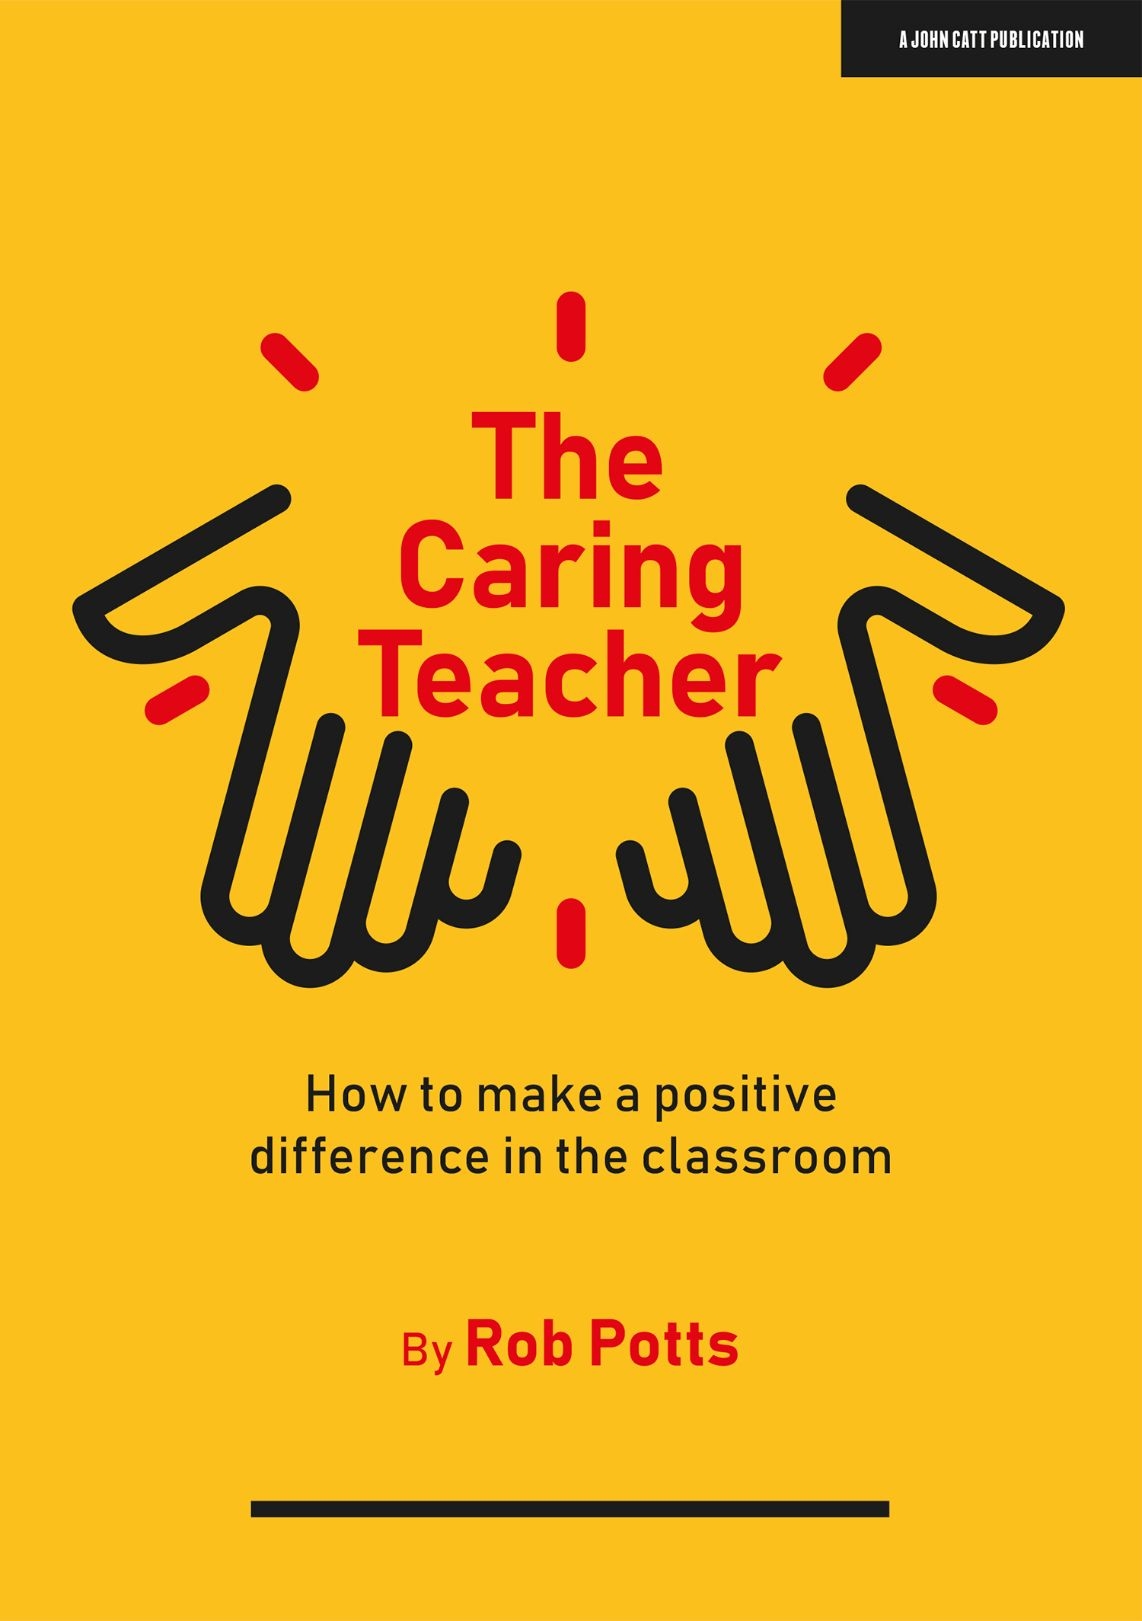 Featured image for “The Caring Teacher: How to make a positive difference in the classroom”